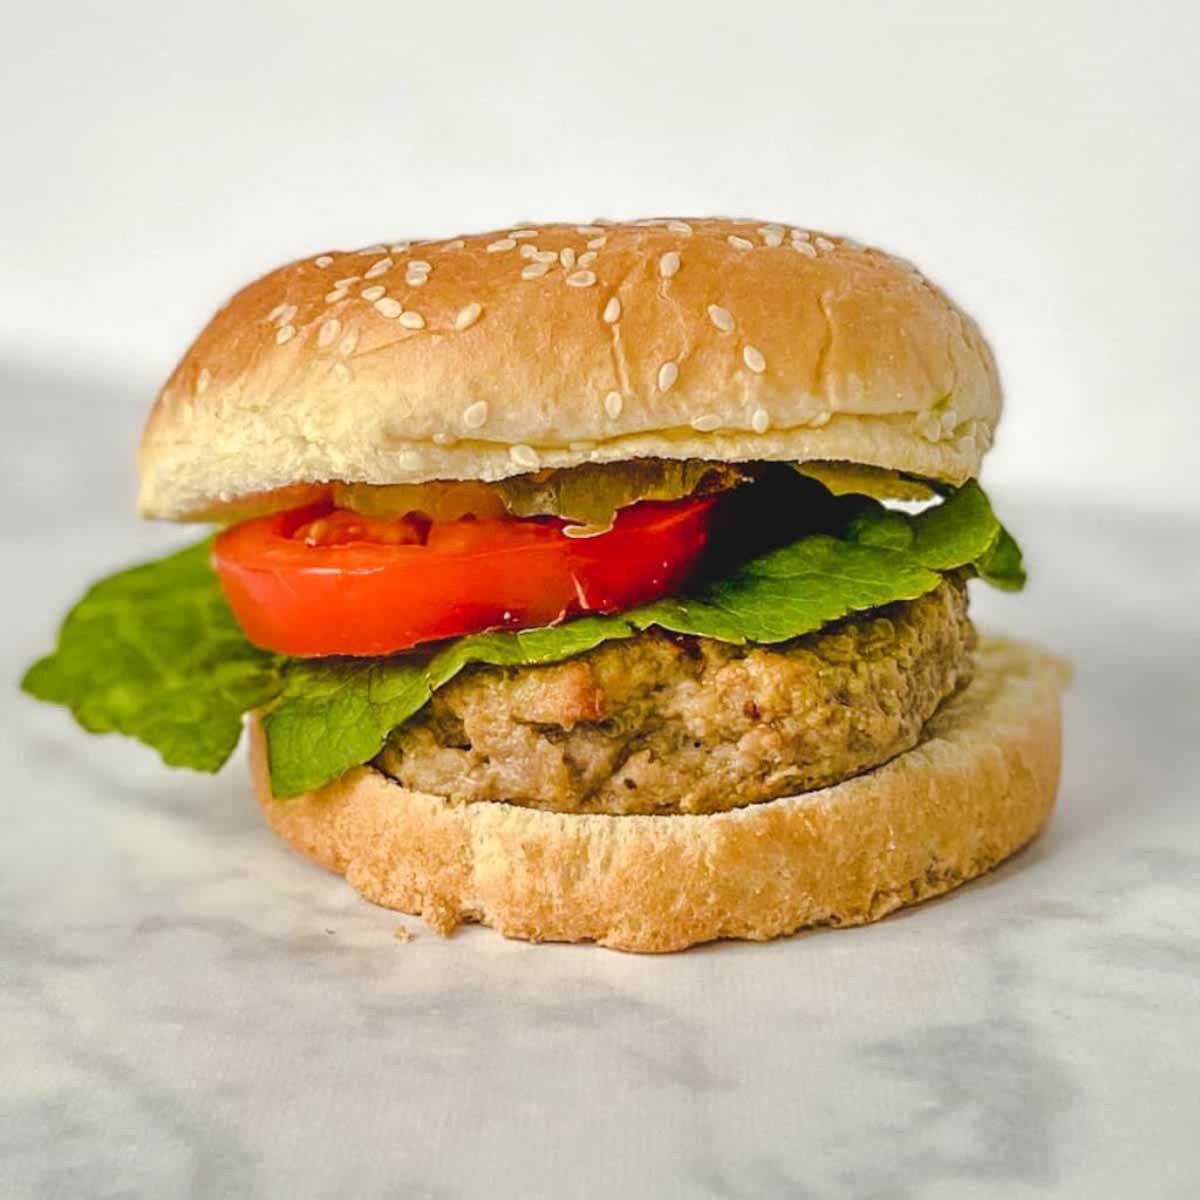 side view of a turkey burger on a bun with lettuce and tomato.